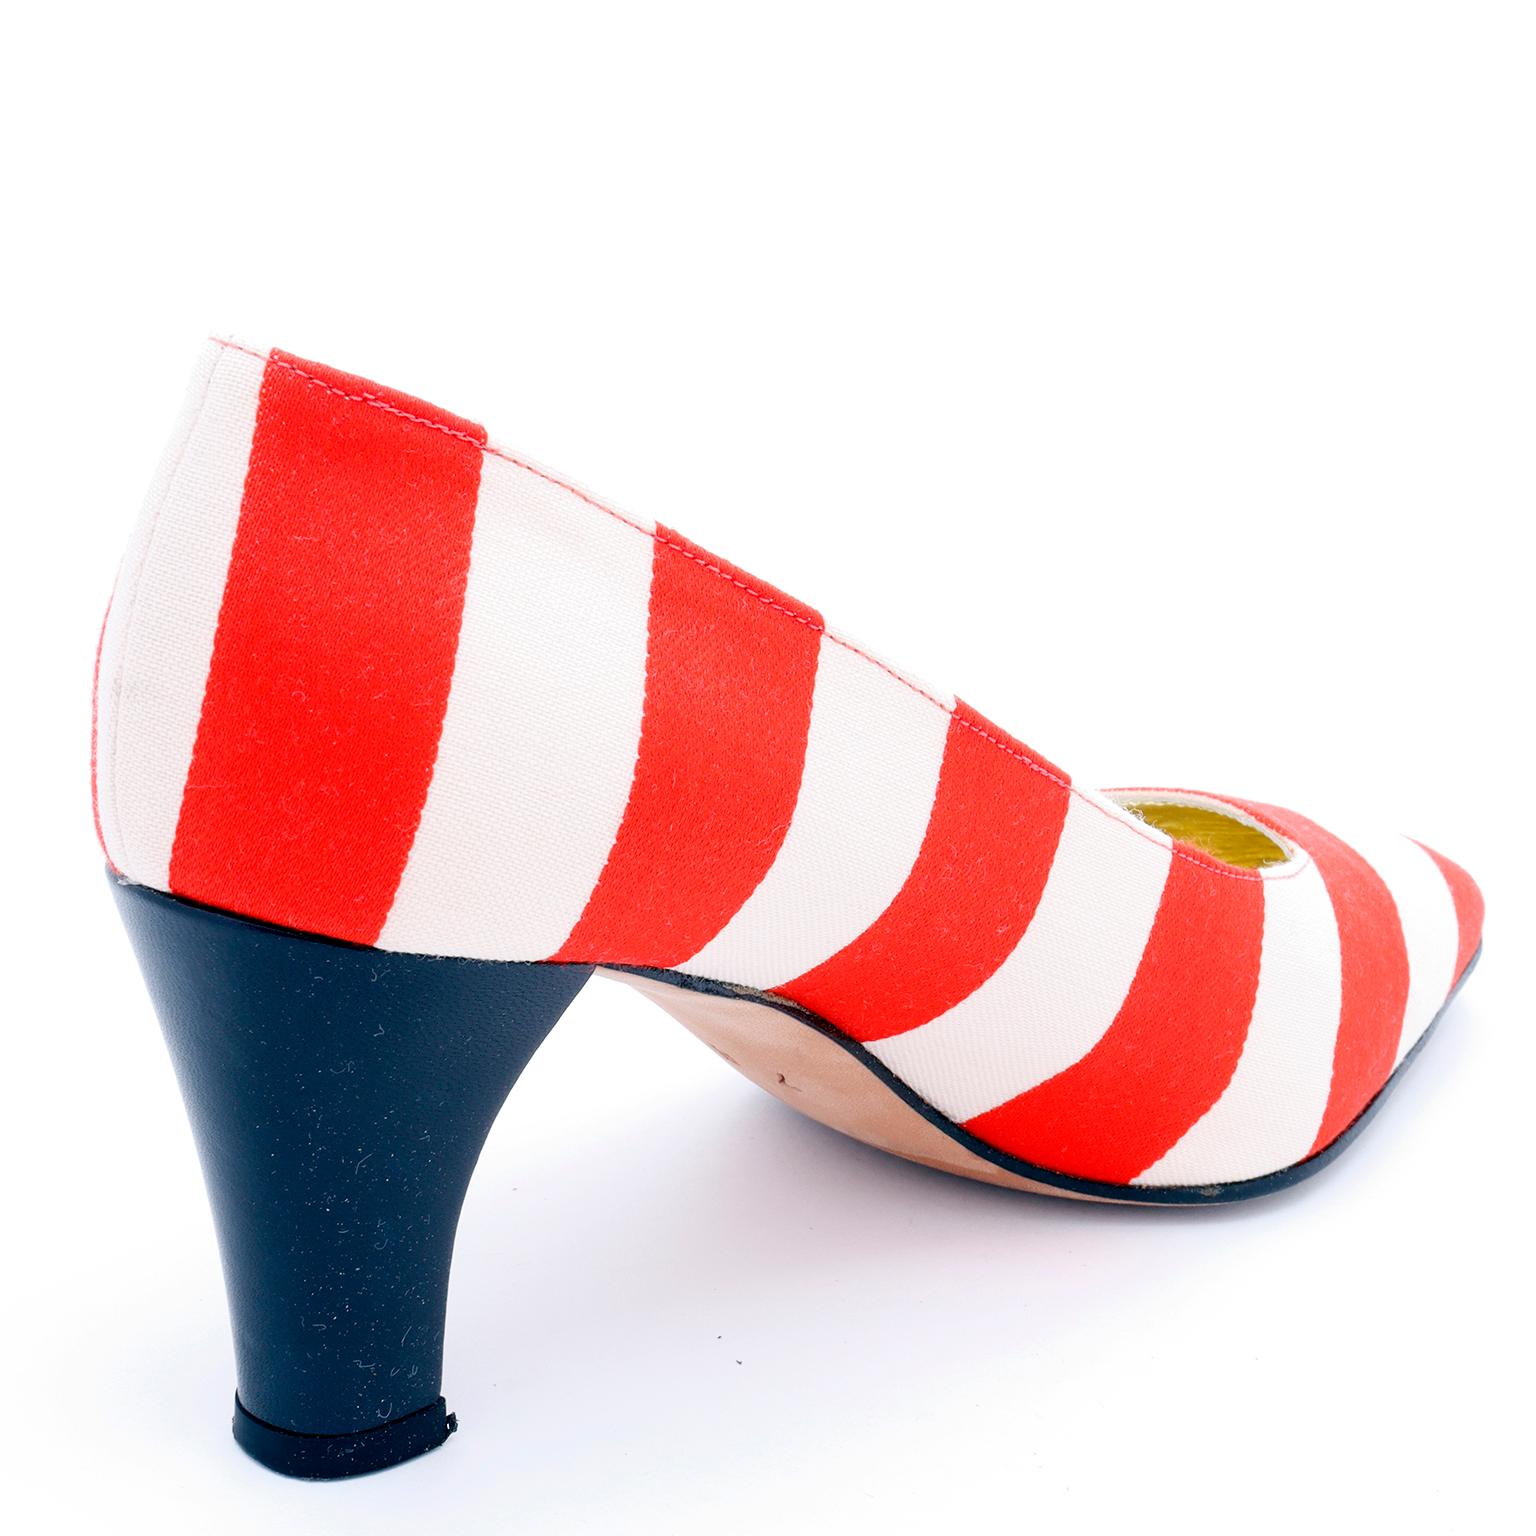 Vintage Escada Red & White Striped Shoes With Black Patent Leather Heels In Excellent Condition For Sale In Portland, OR